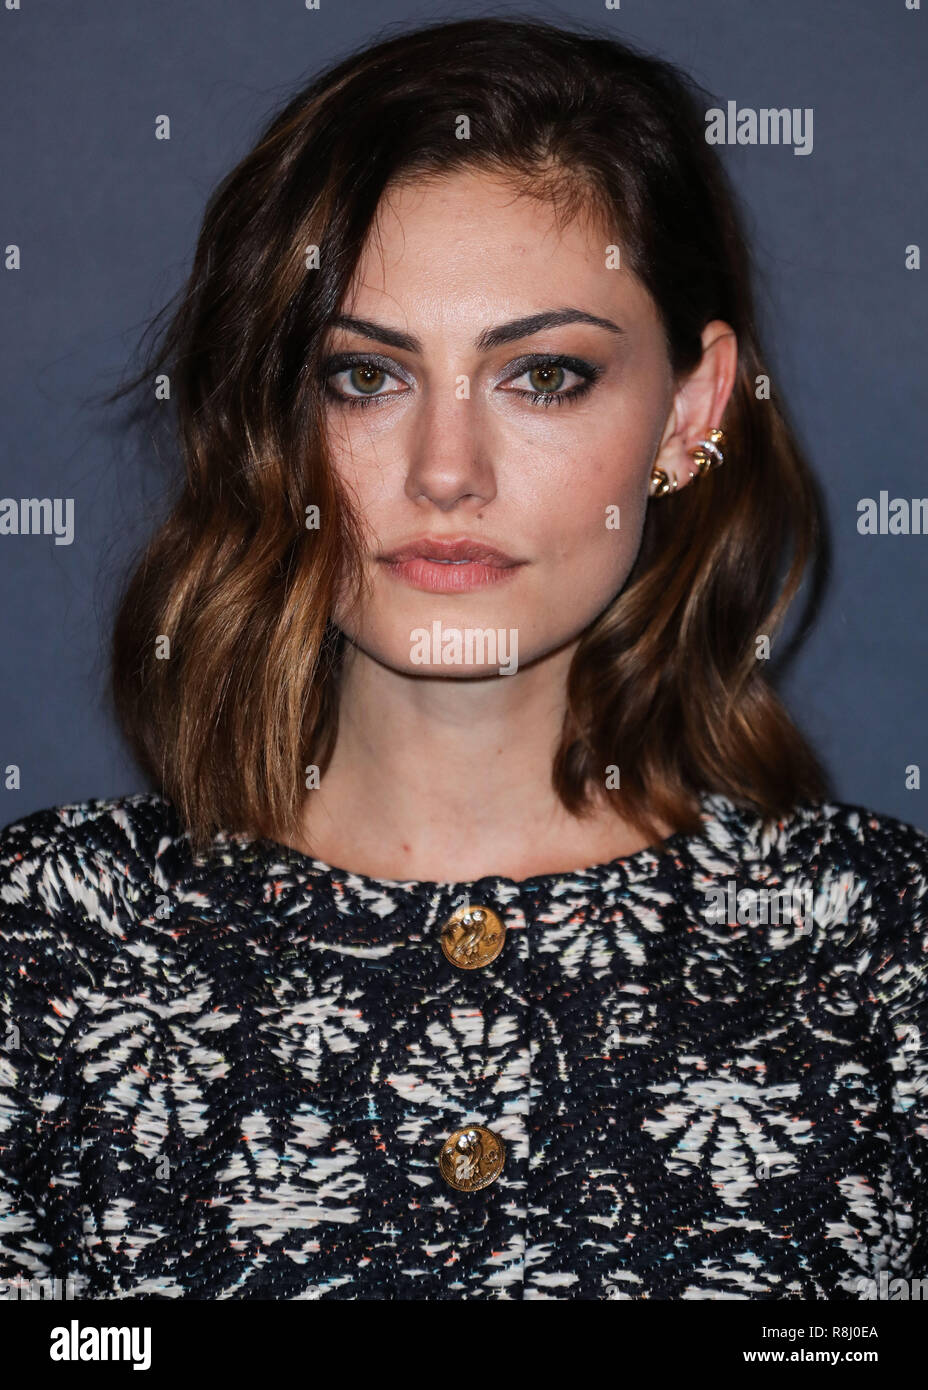 Dress Like Phoebe Tonkin on X: [2019]  For InStyle Australia, Phoebe  Tonkin wears #chanel Coco Crush Quilted Motif Earrings ($7,400) in 18k  White Gold and Diamonds & Coco Crush Quilted Motif